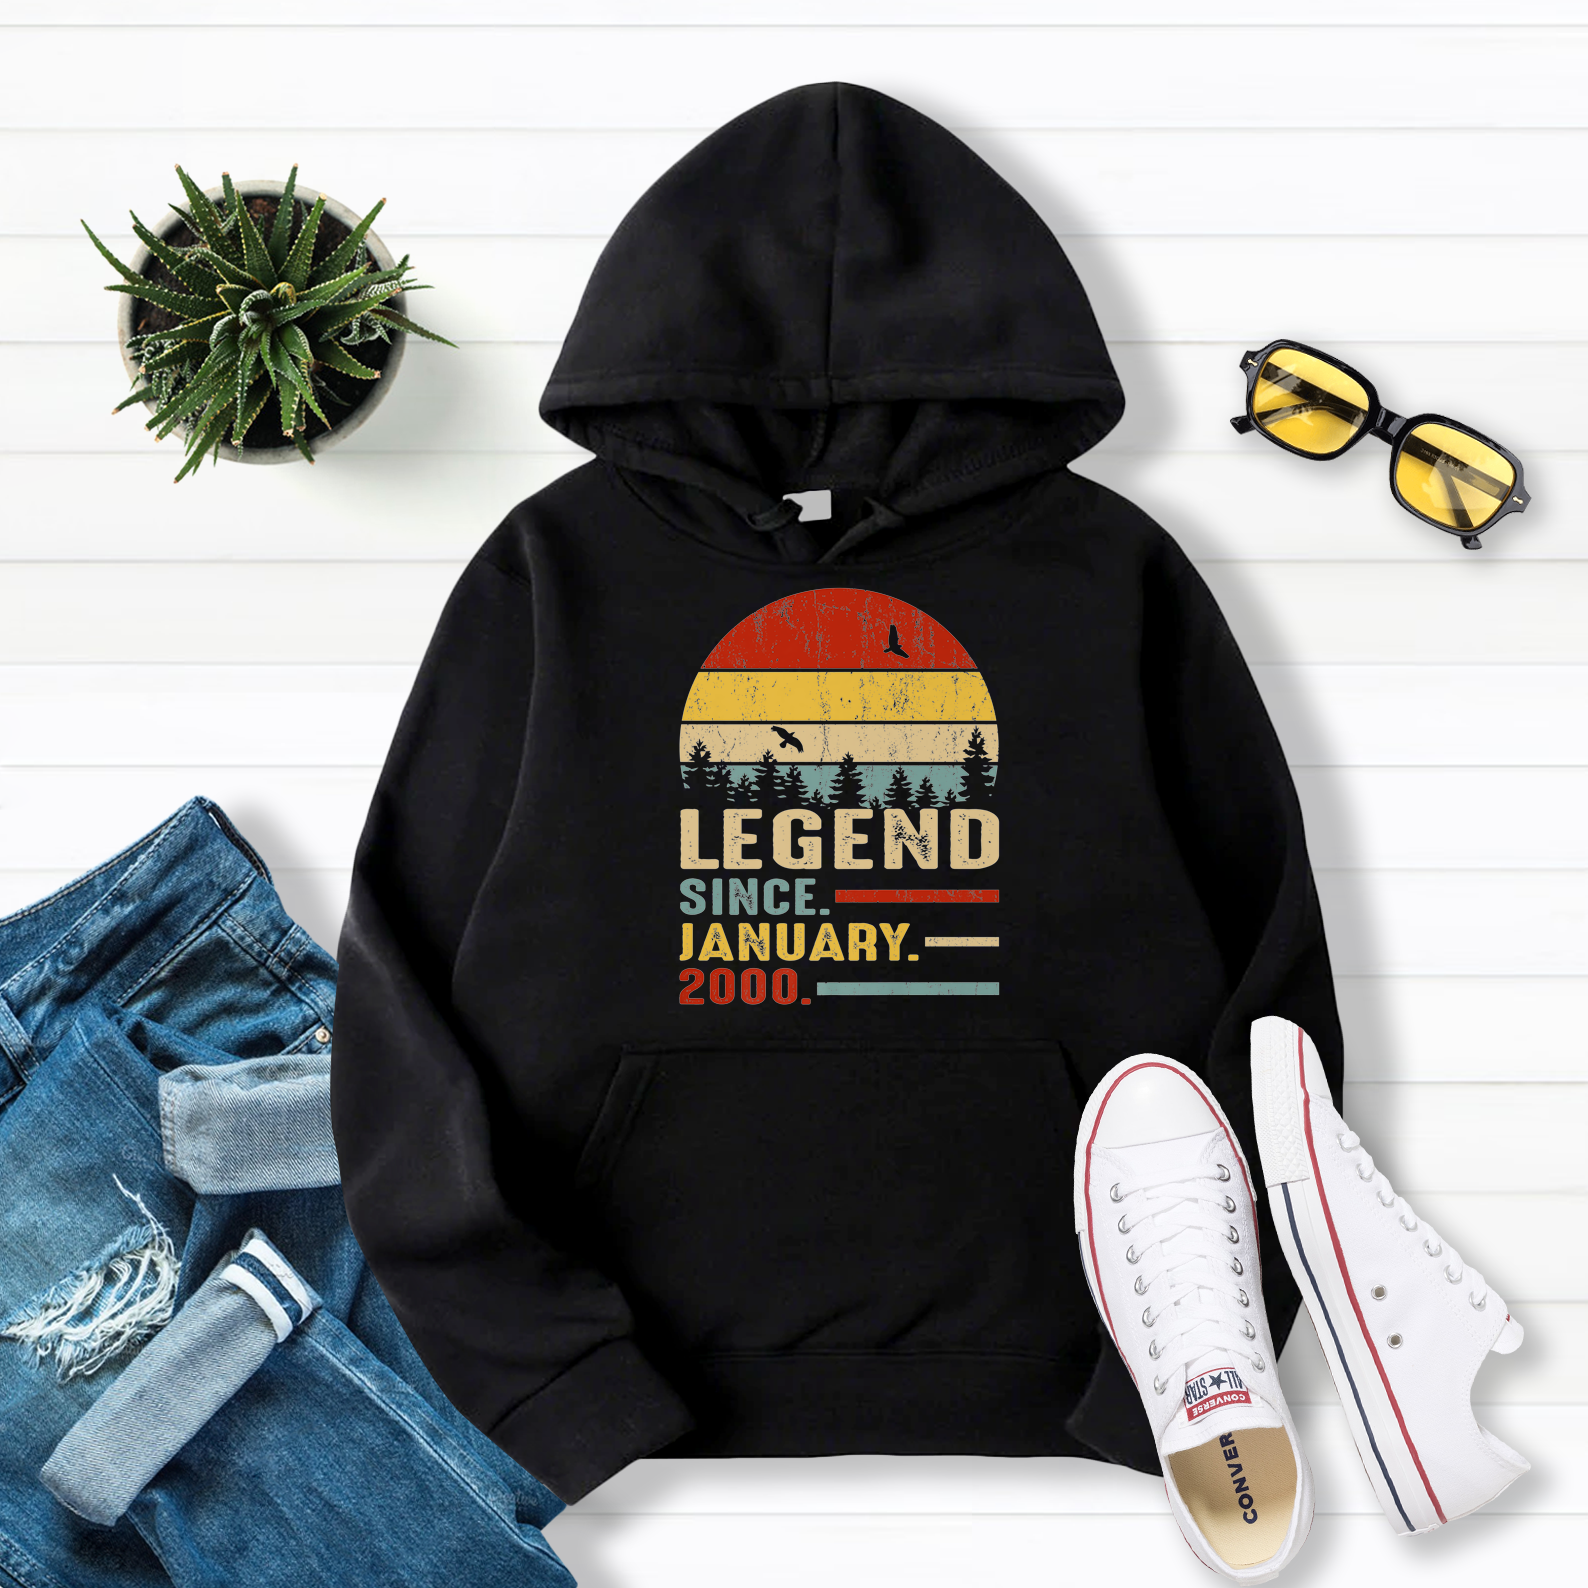 21 Years Old Retro Birthday Gift Legend Since January 2000 Premium Pullover Hoodie Black S-5XL